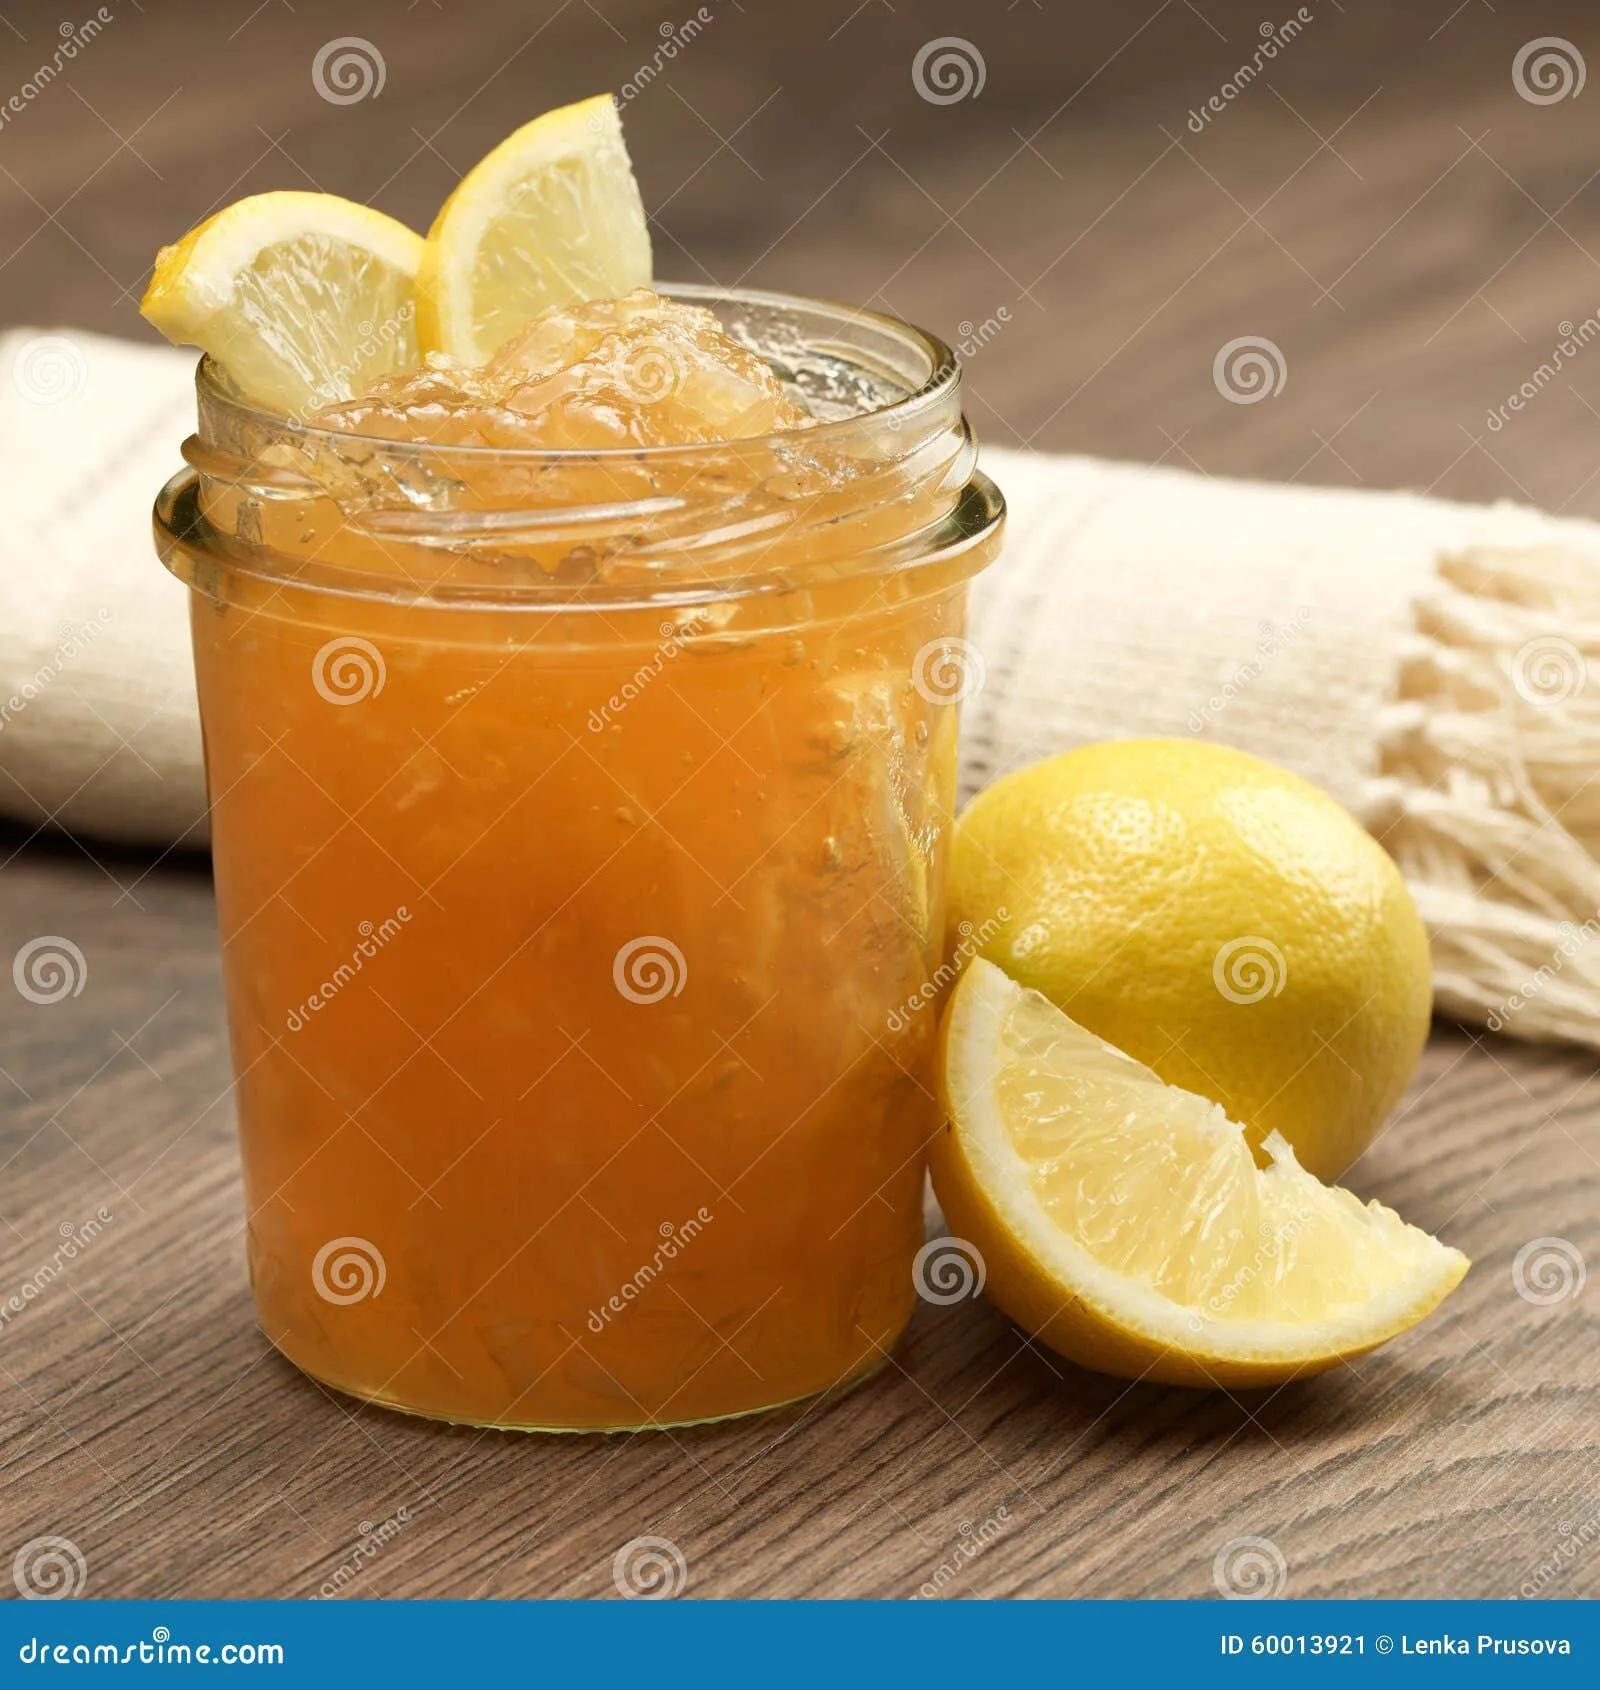 Marmalade stock image. Image of table, leaf, jelly, ripe - 60013921